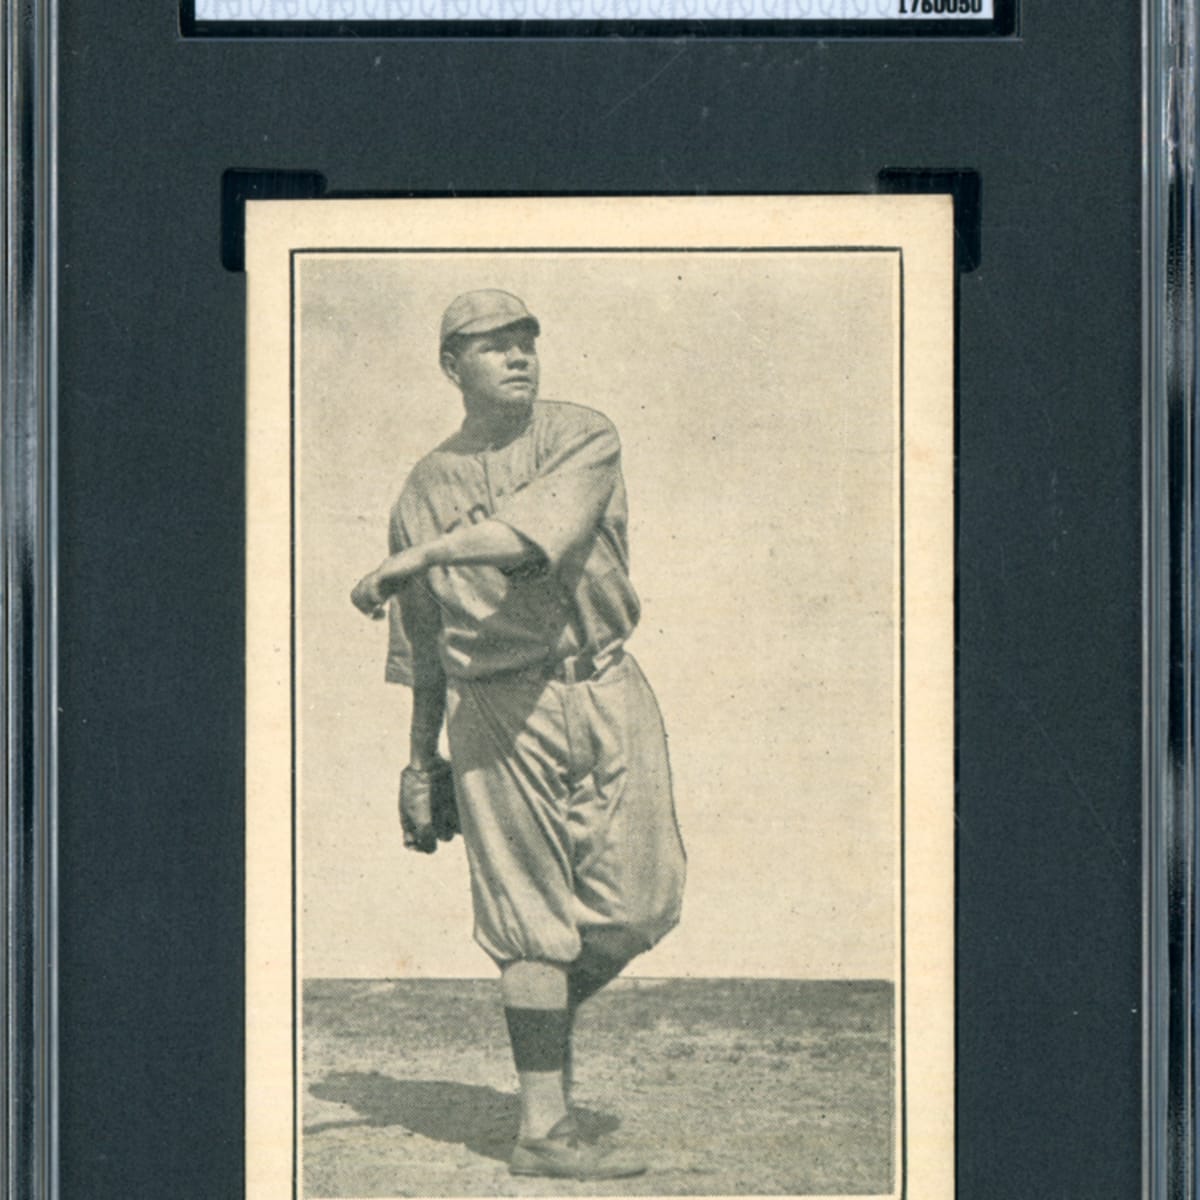 Babe Ruth items dominate Memory Lane auction - Sports Collectors